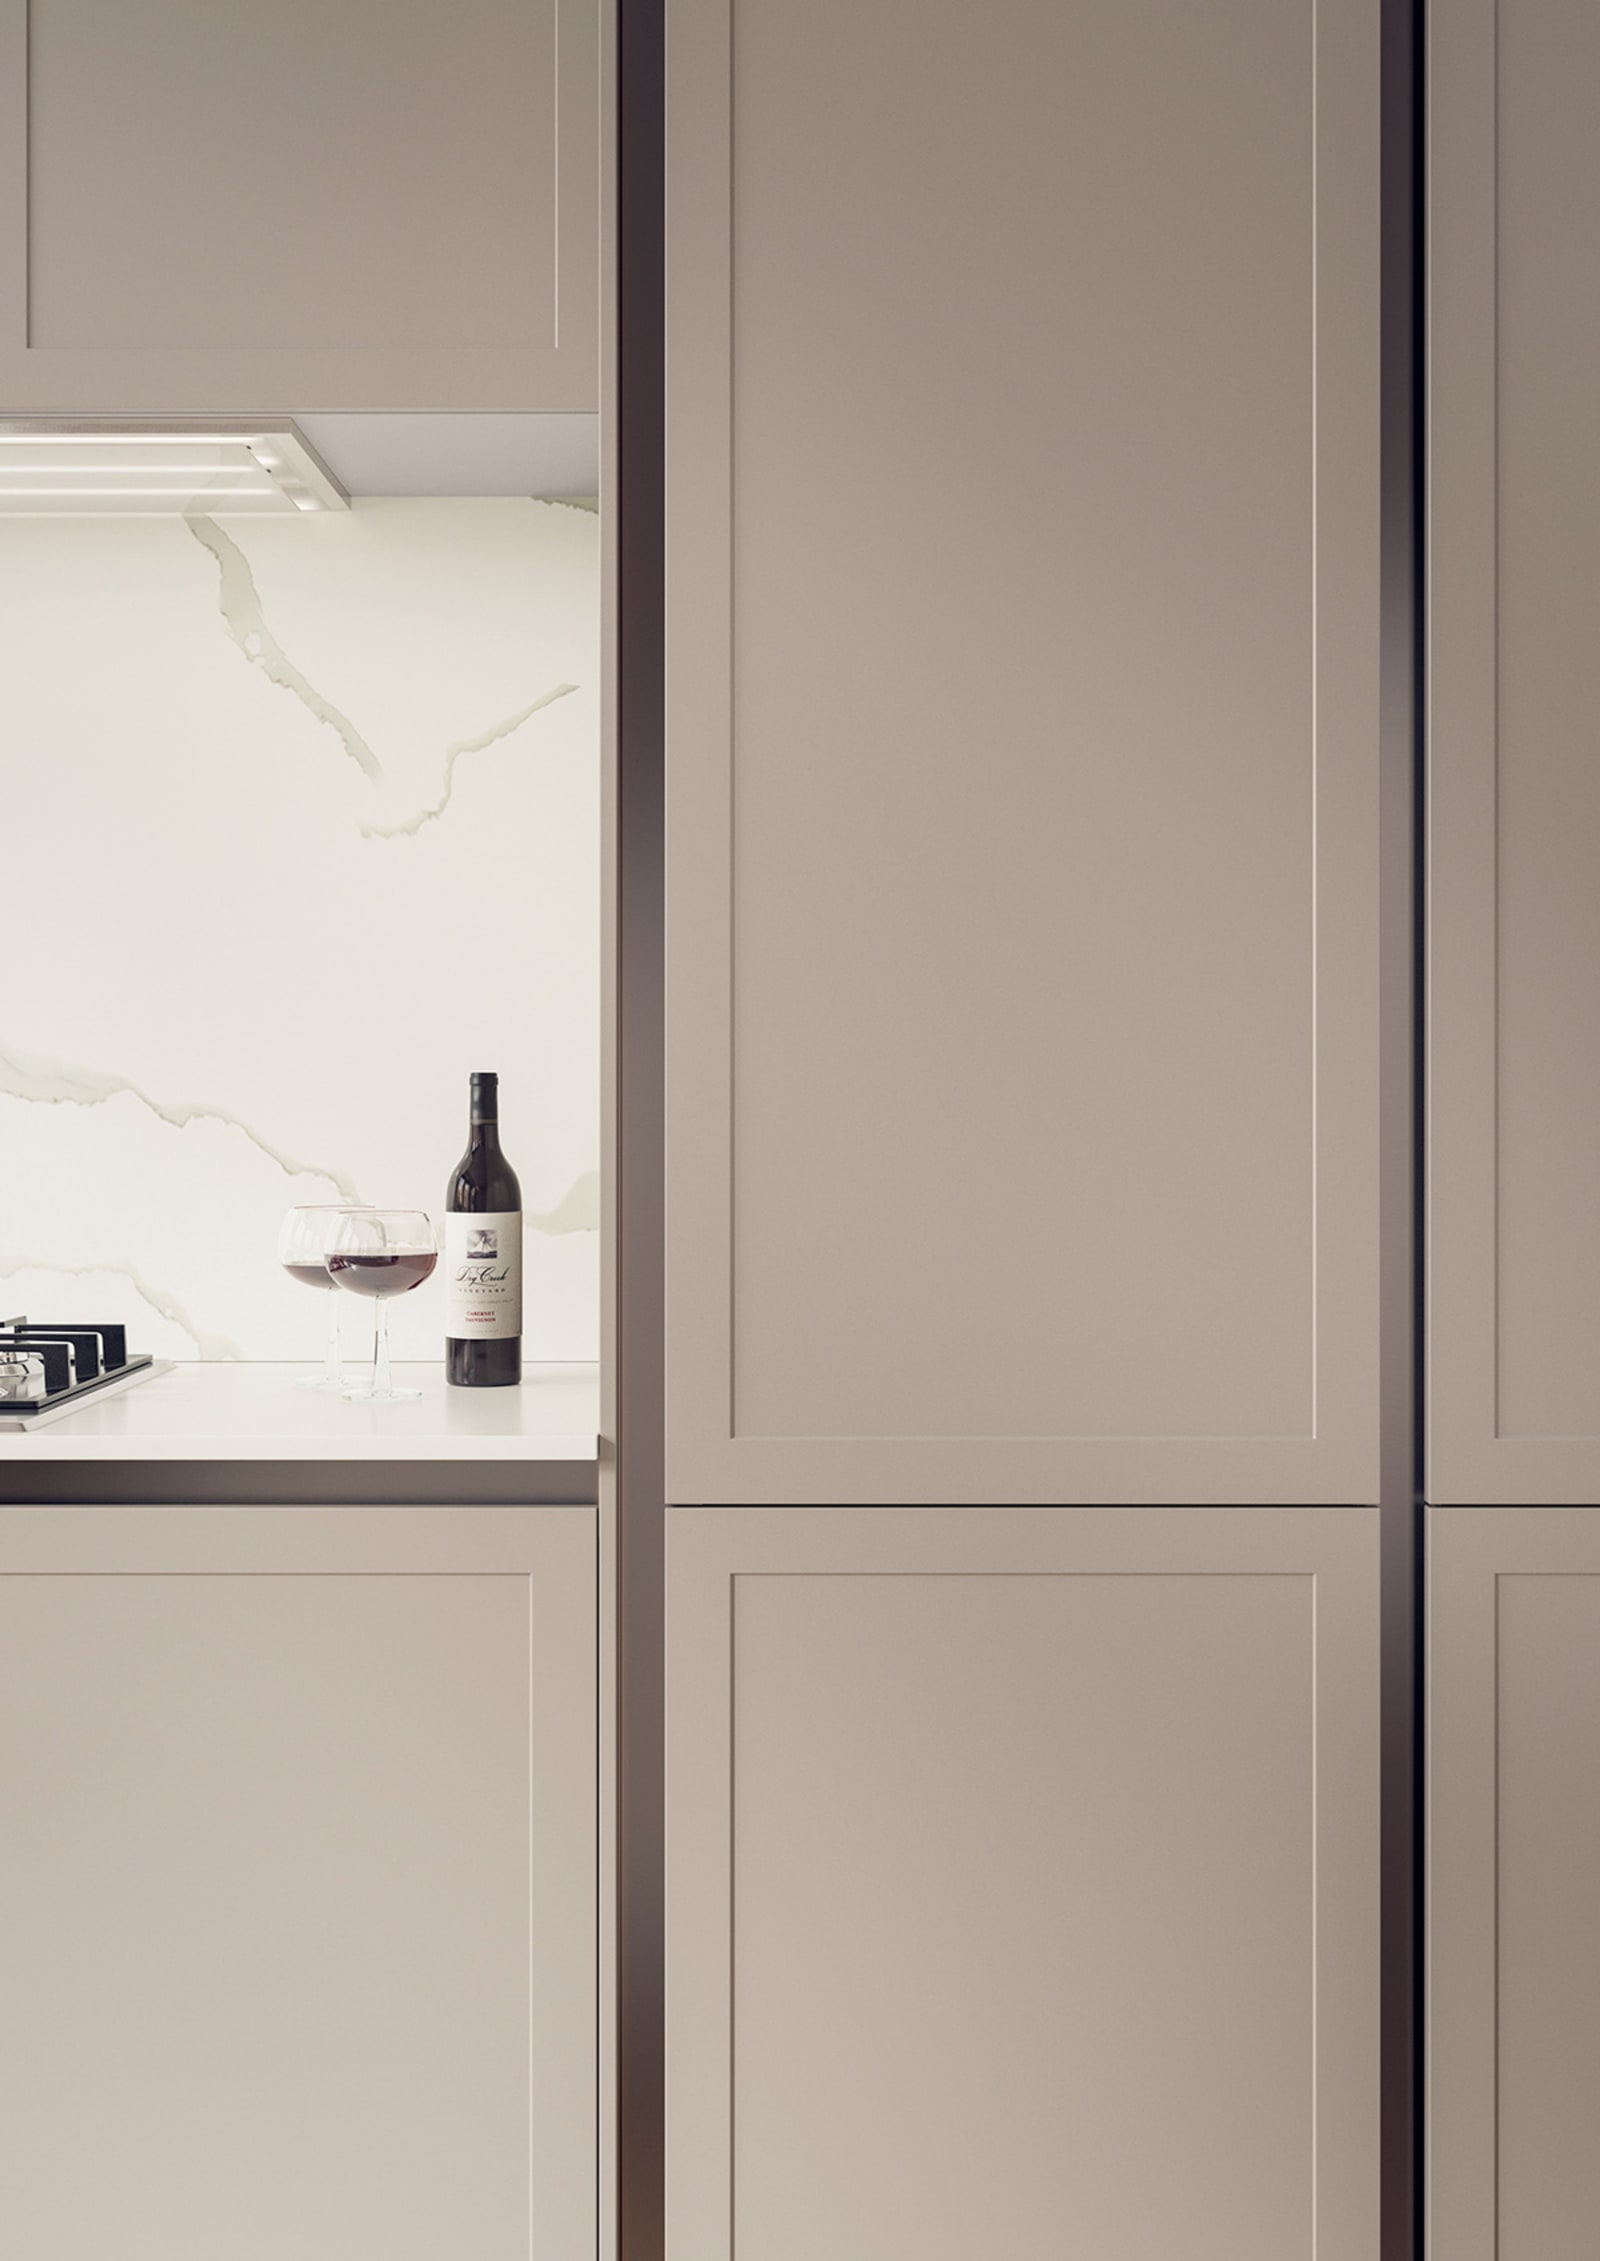 Integra Dunham Kitchen by Magnet. Premium painted matt finish with unique door style available in 20 colours.